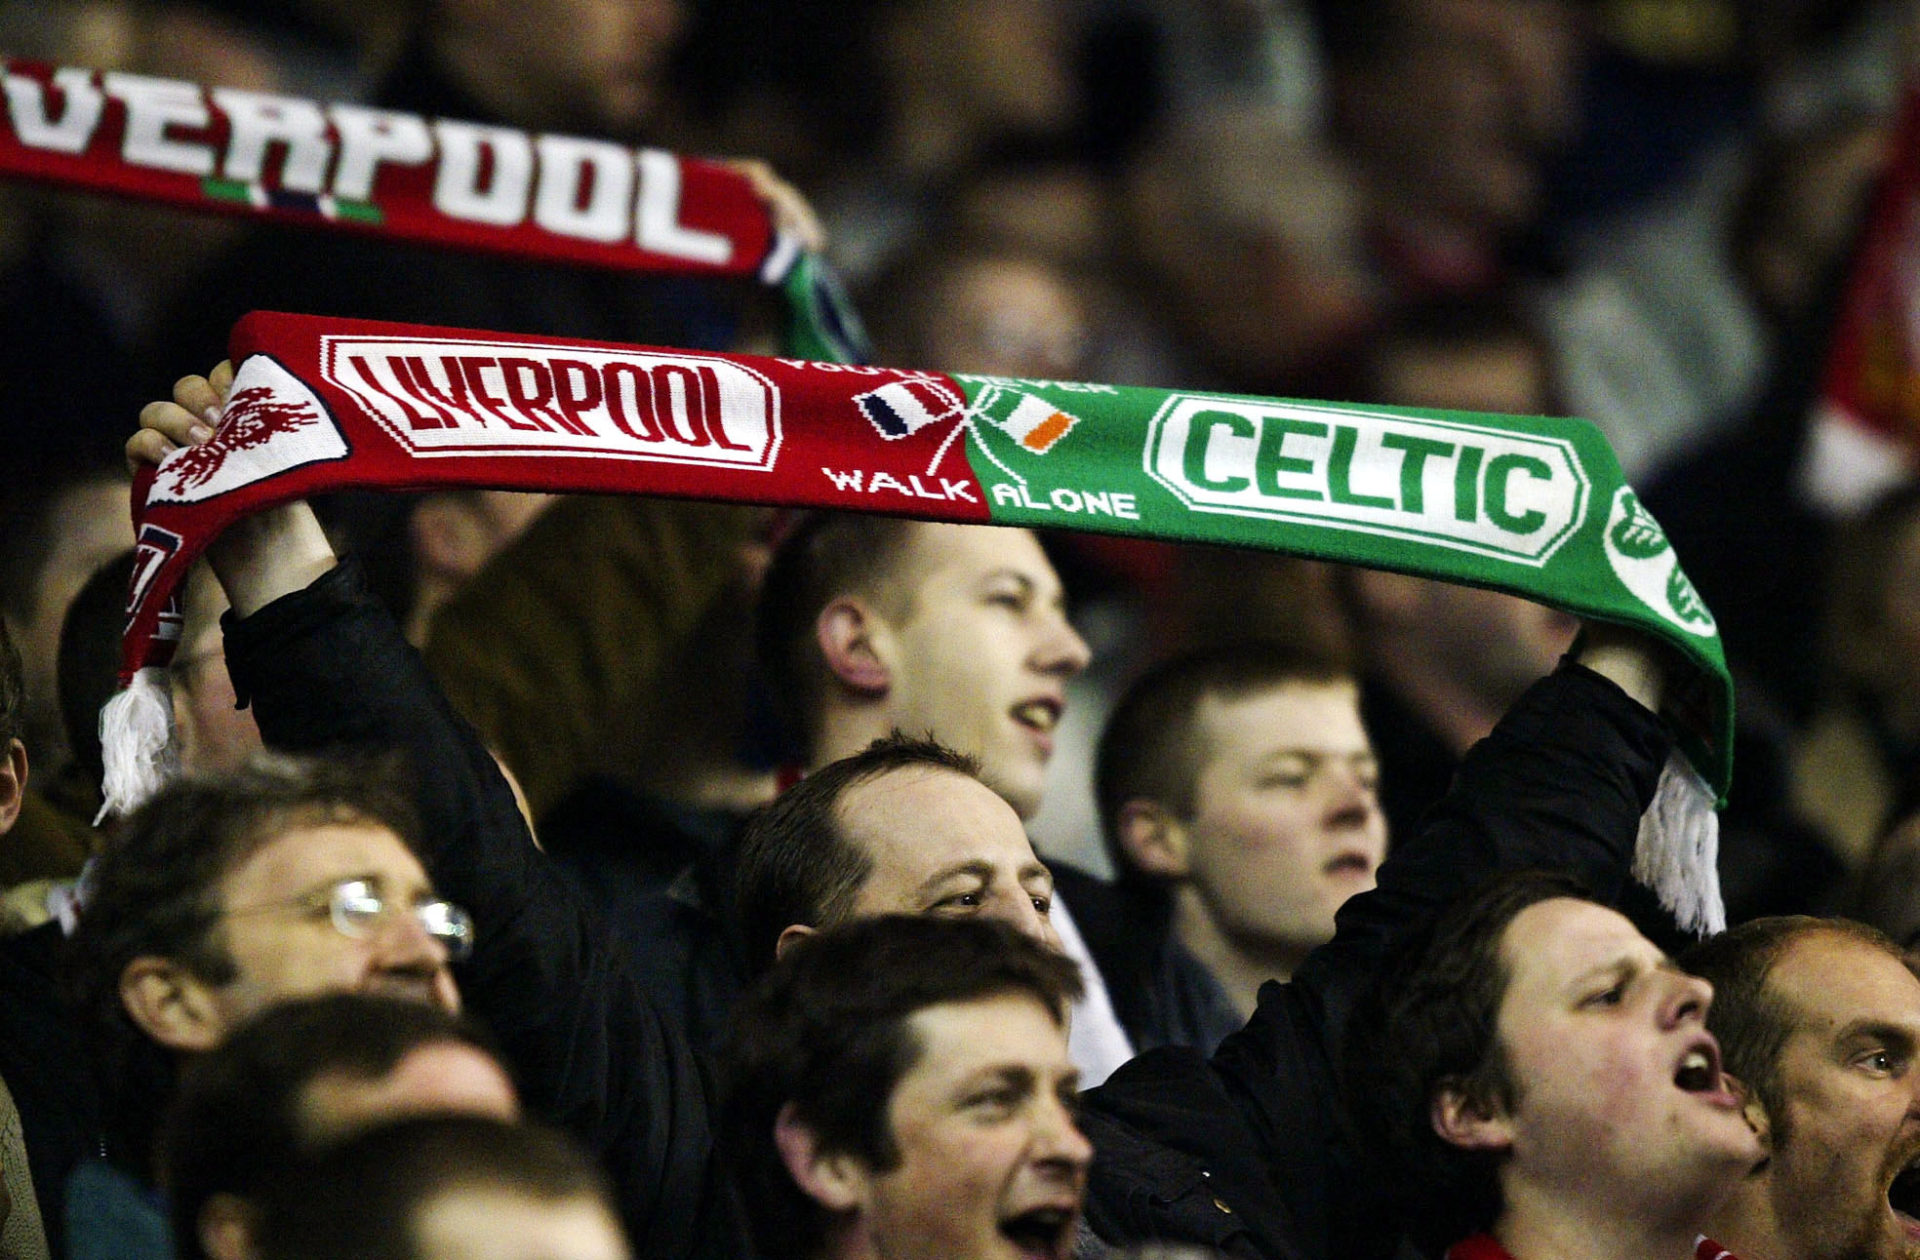 Celtic and Liverpool haven't met competitively since 2003